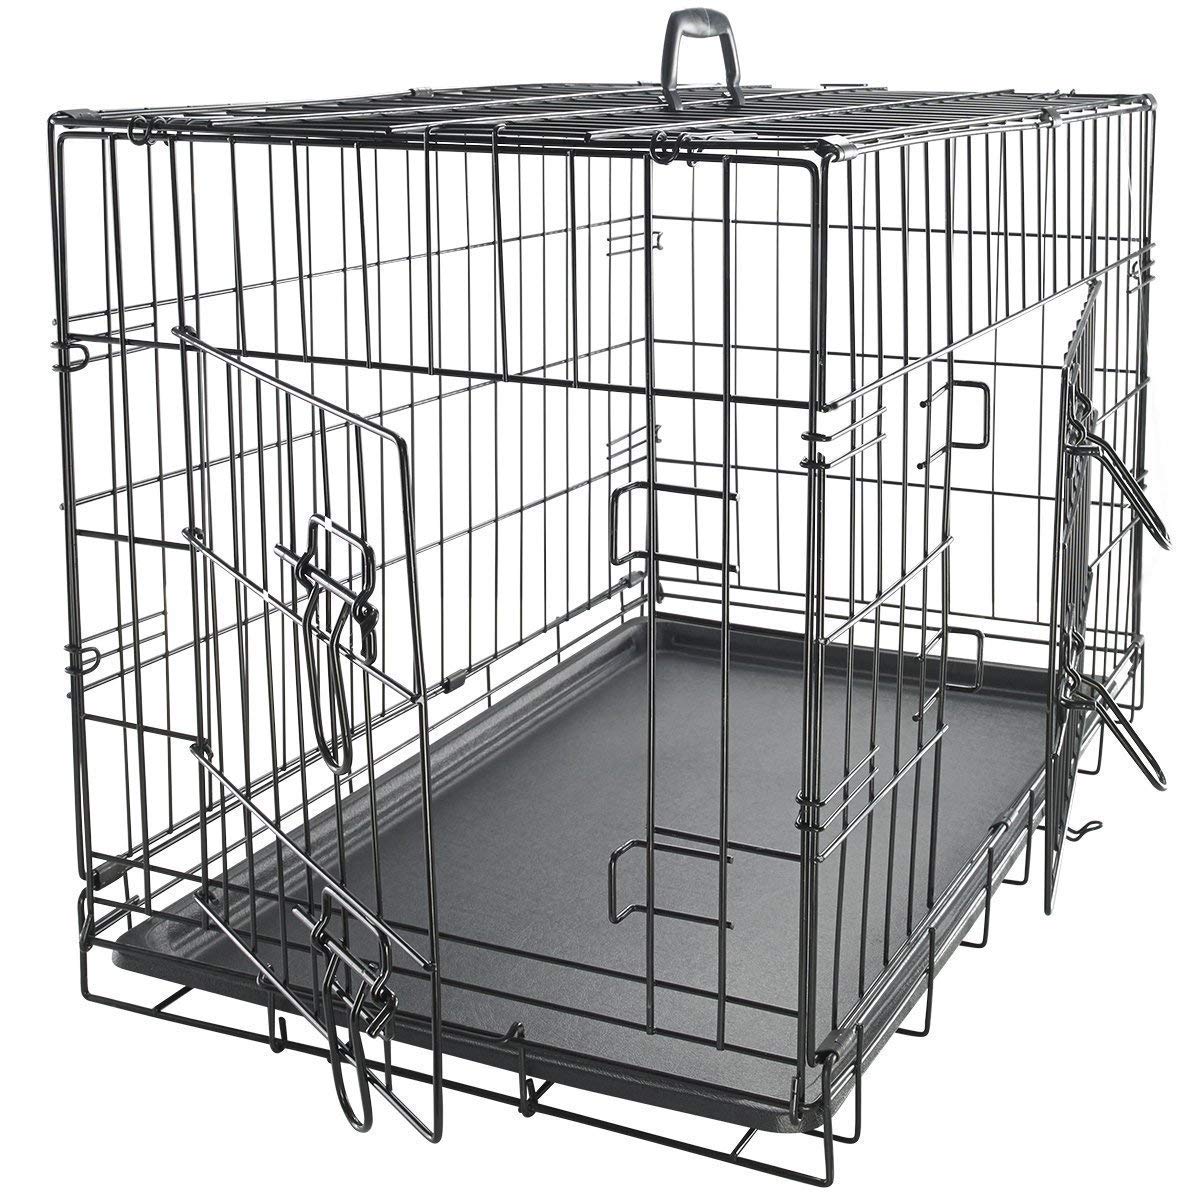 Paws & Pals Wire Dog Crate with Divider and Tray for Training